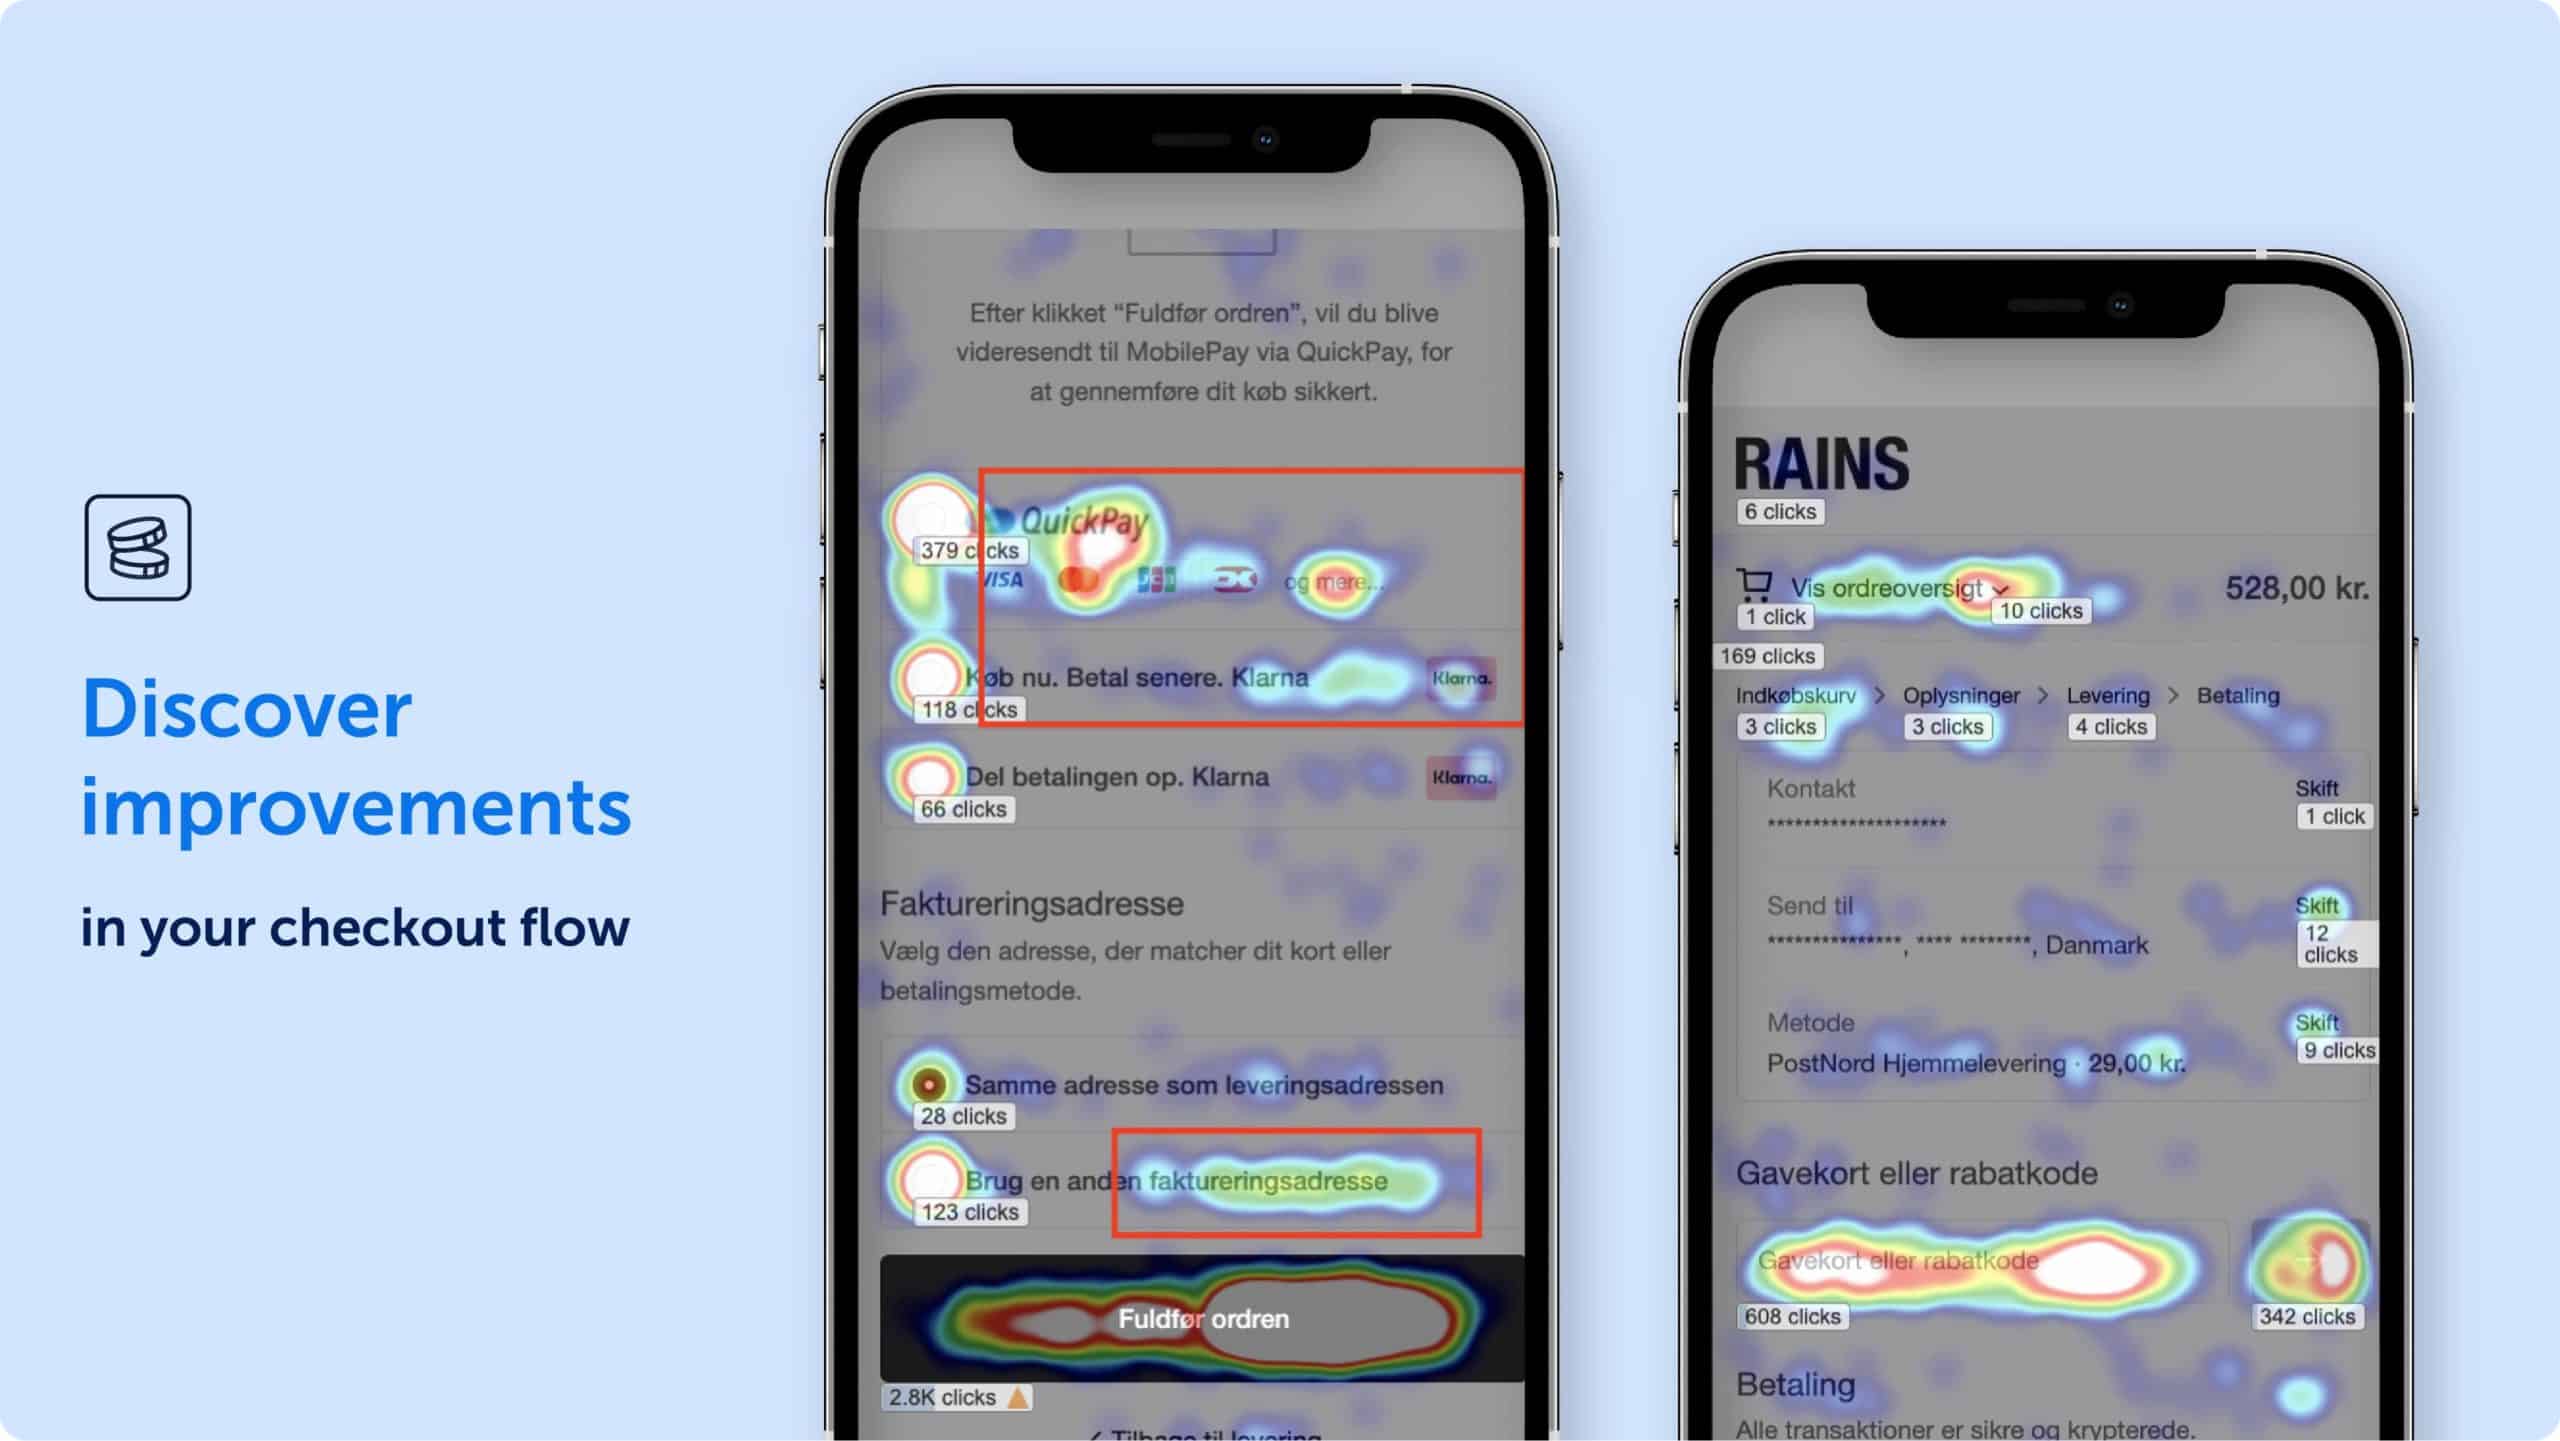 RAINS relied on heatmaps to find friction in their checkout flow